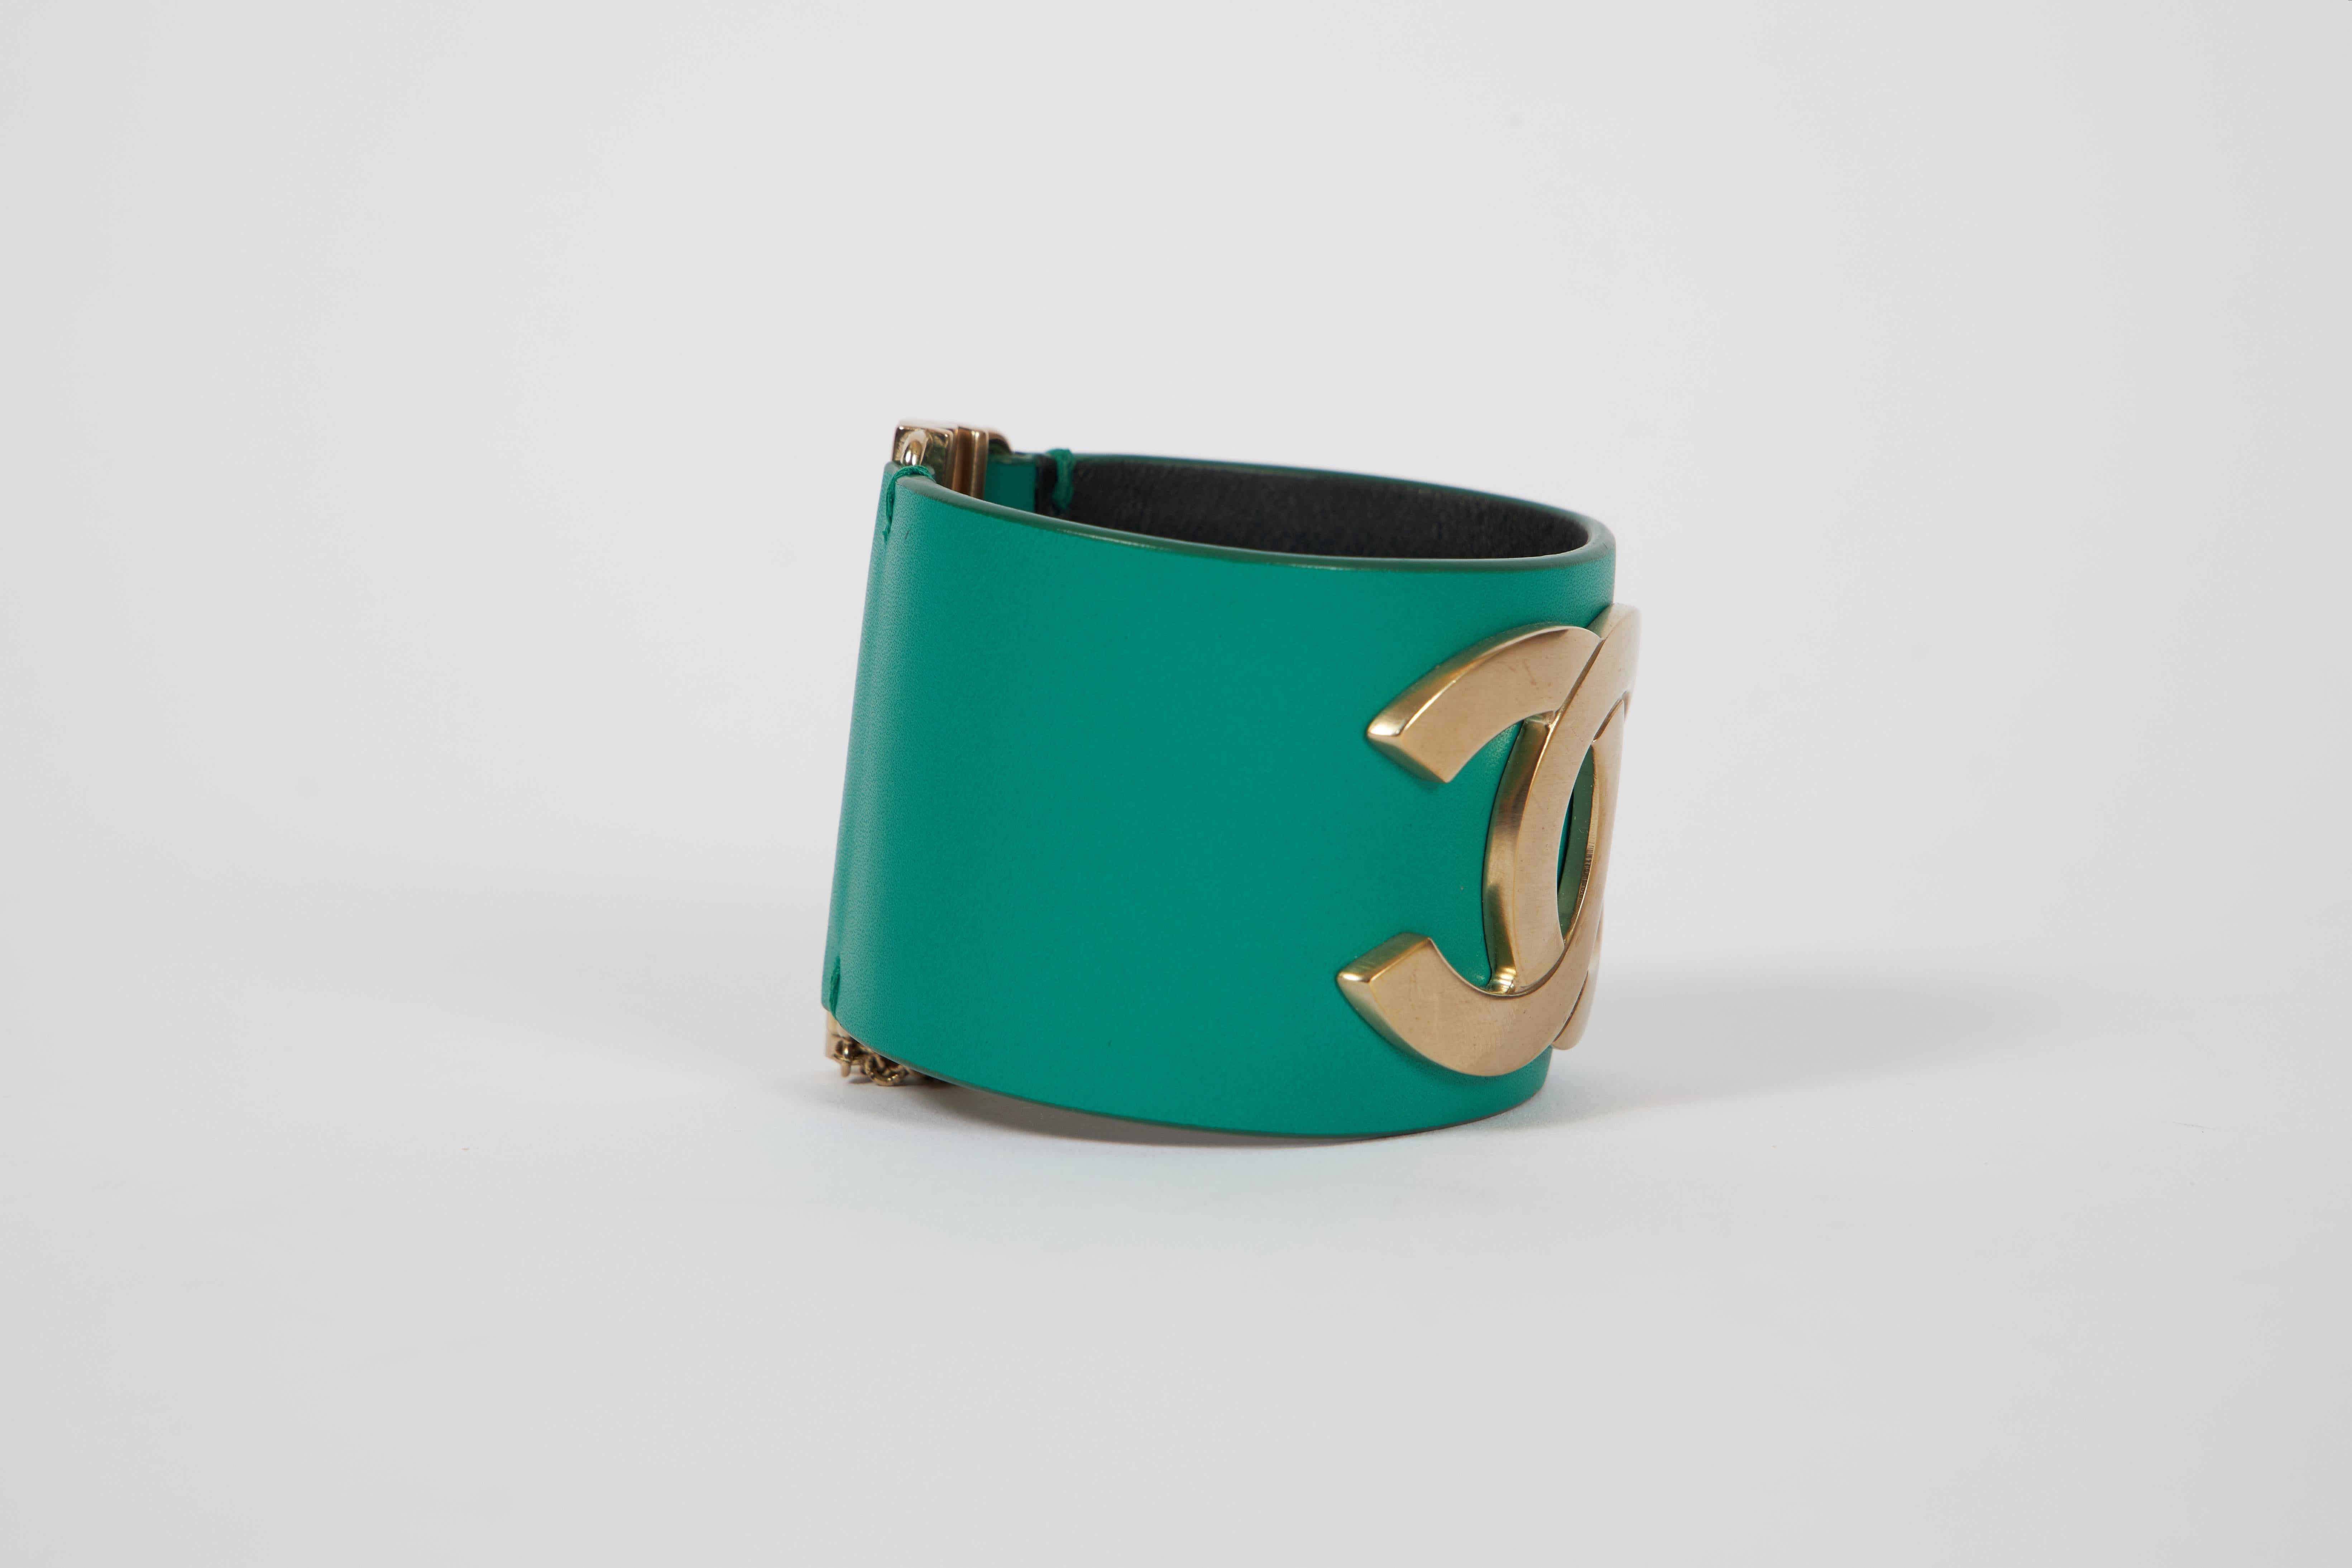 Chanel emerald green leather cuff with a satin silver finish logo. 7.25